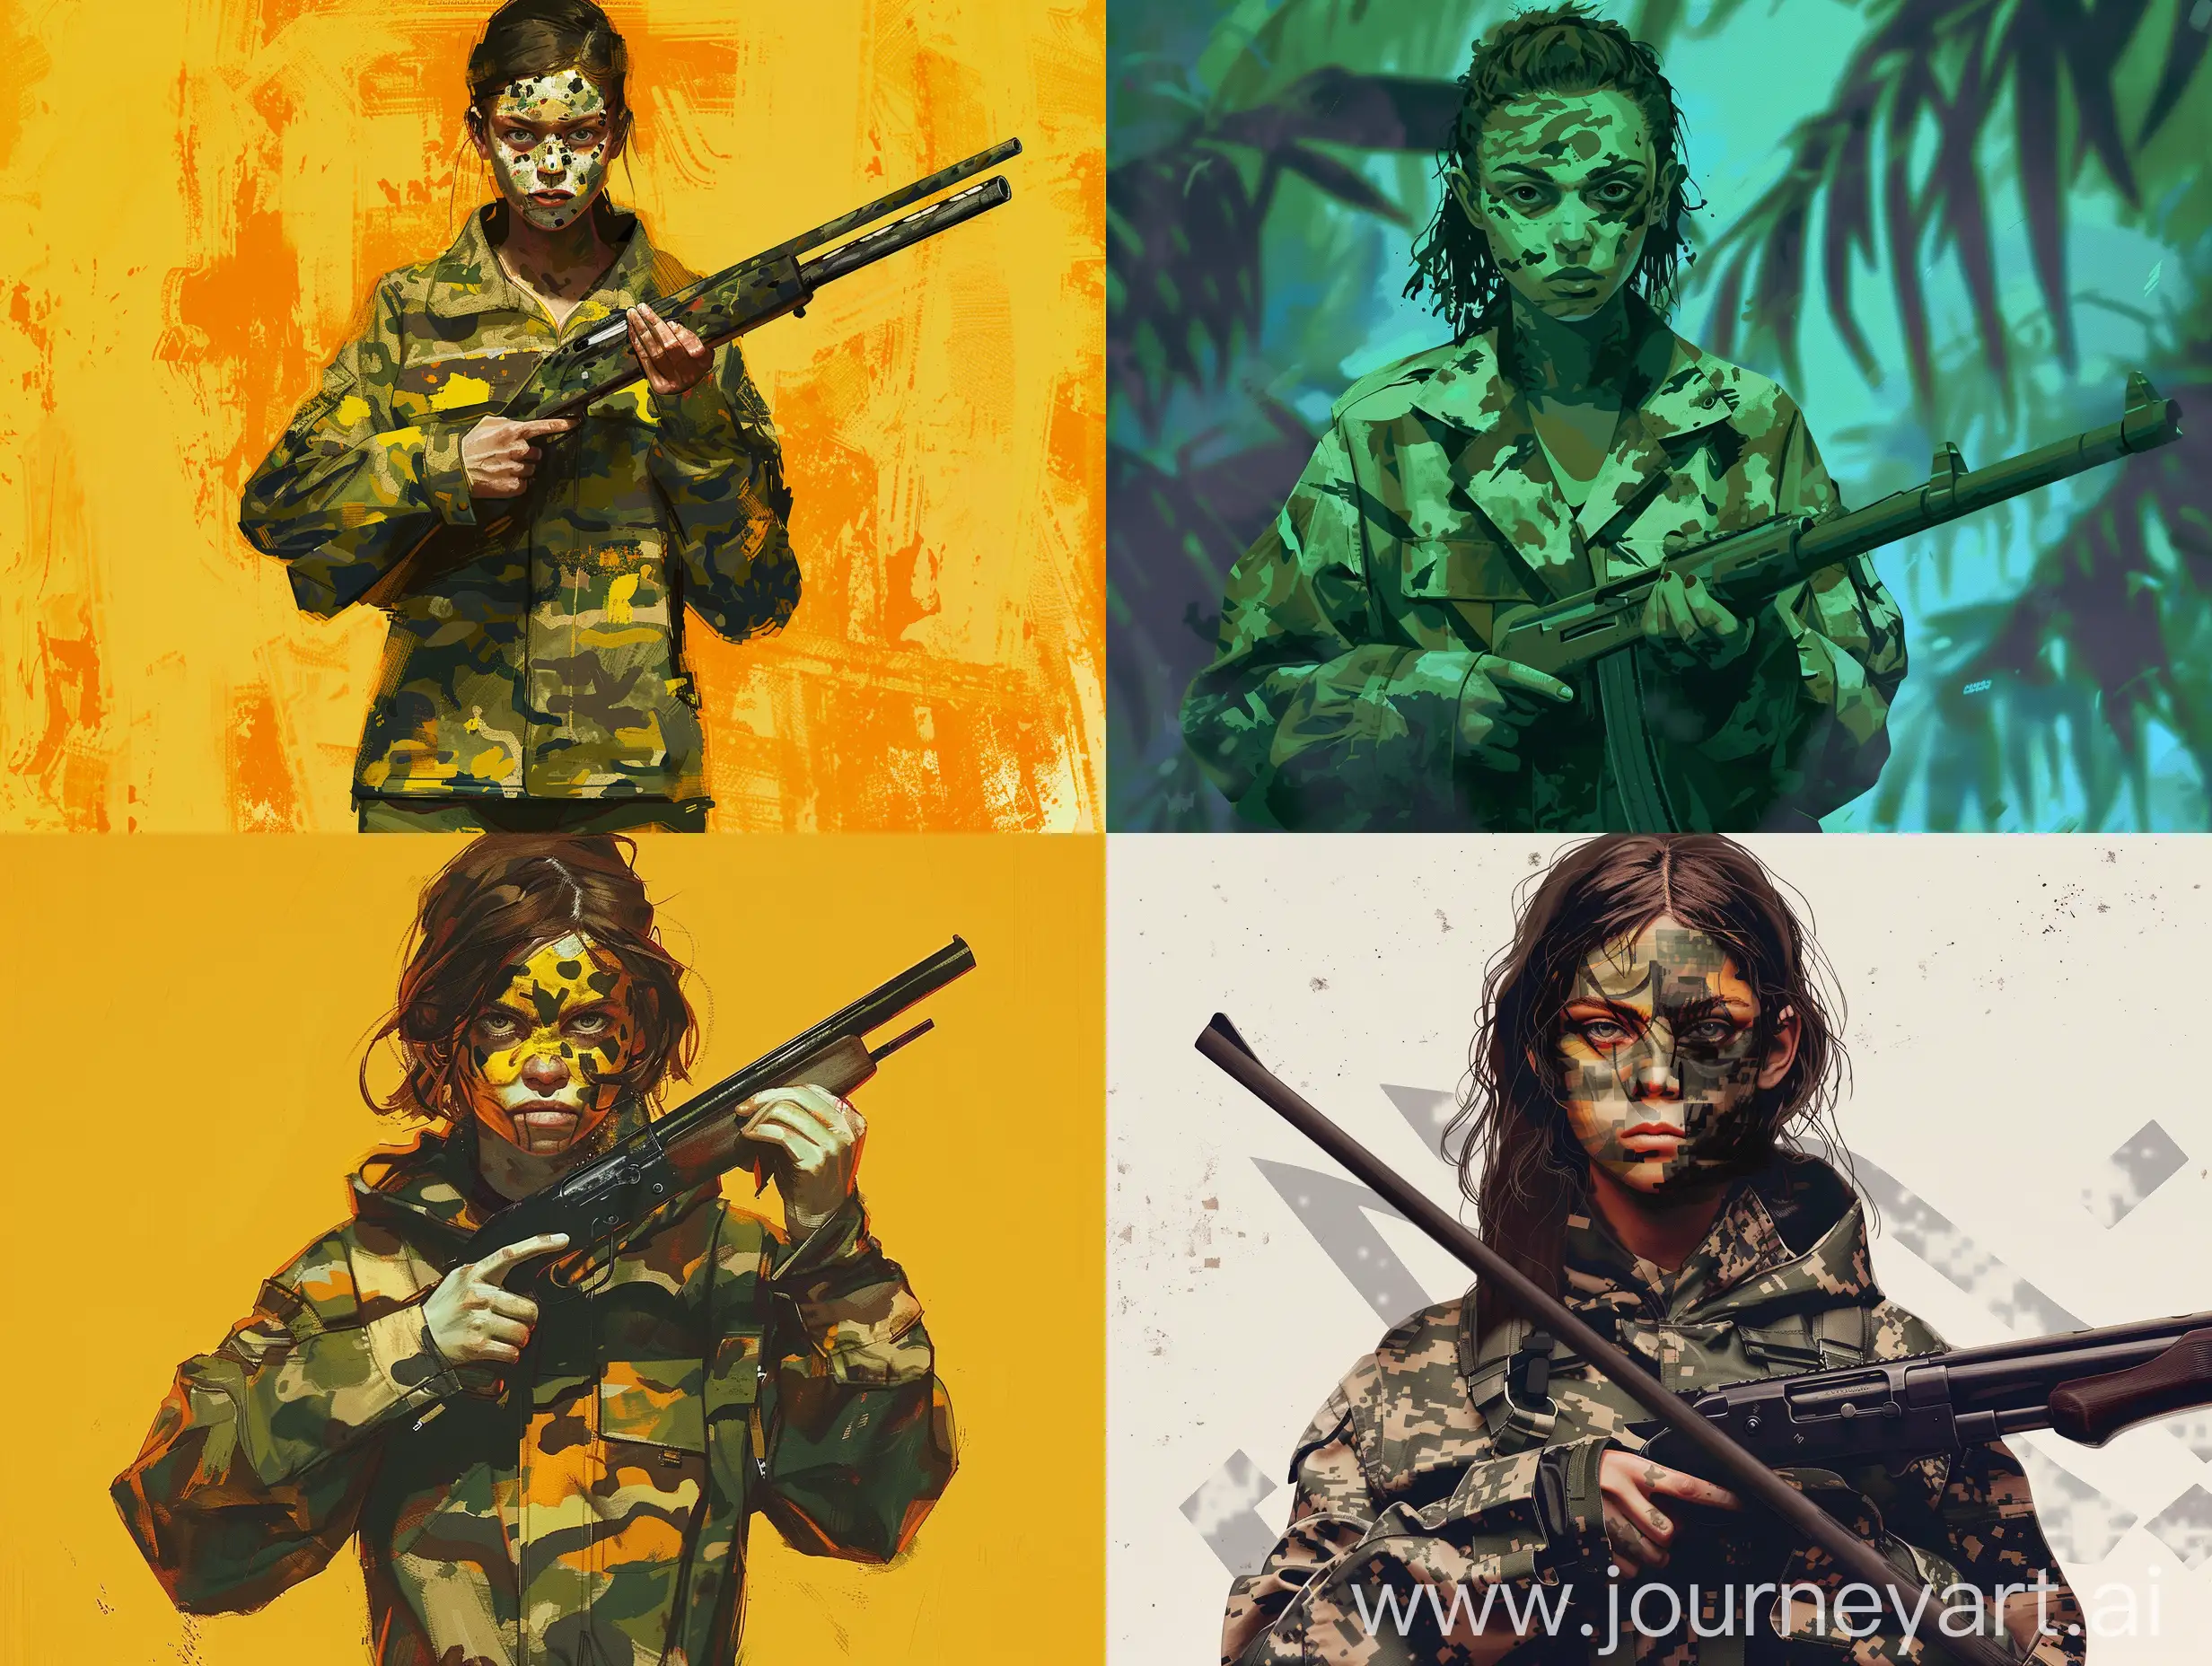 Art of a teen, average height, stealthy-looking woman with unexpressive eyes wearing a camouflage suit, camouflage on her face, shotgun in hands, Hotline Miami style art